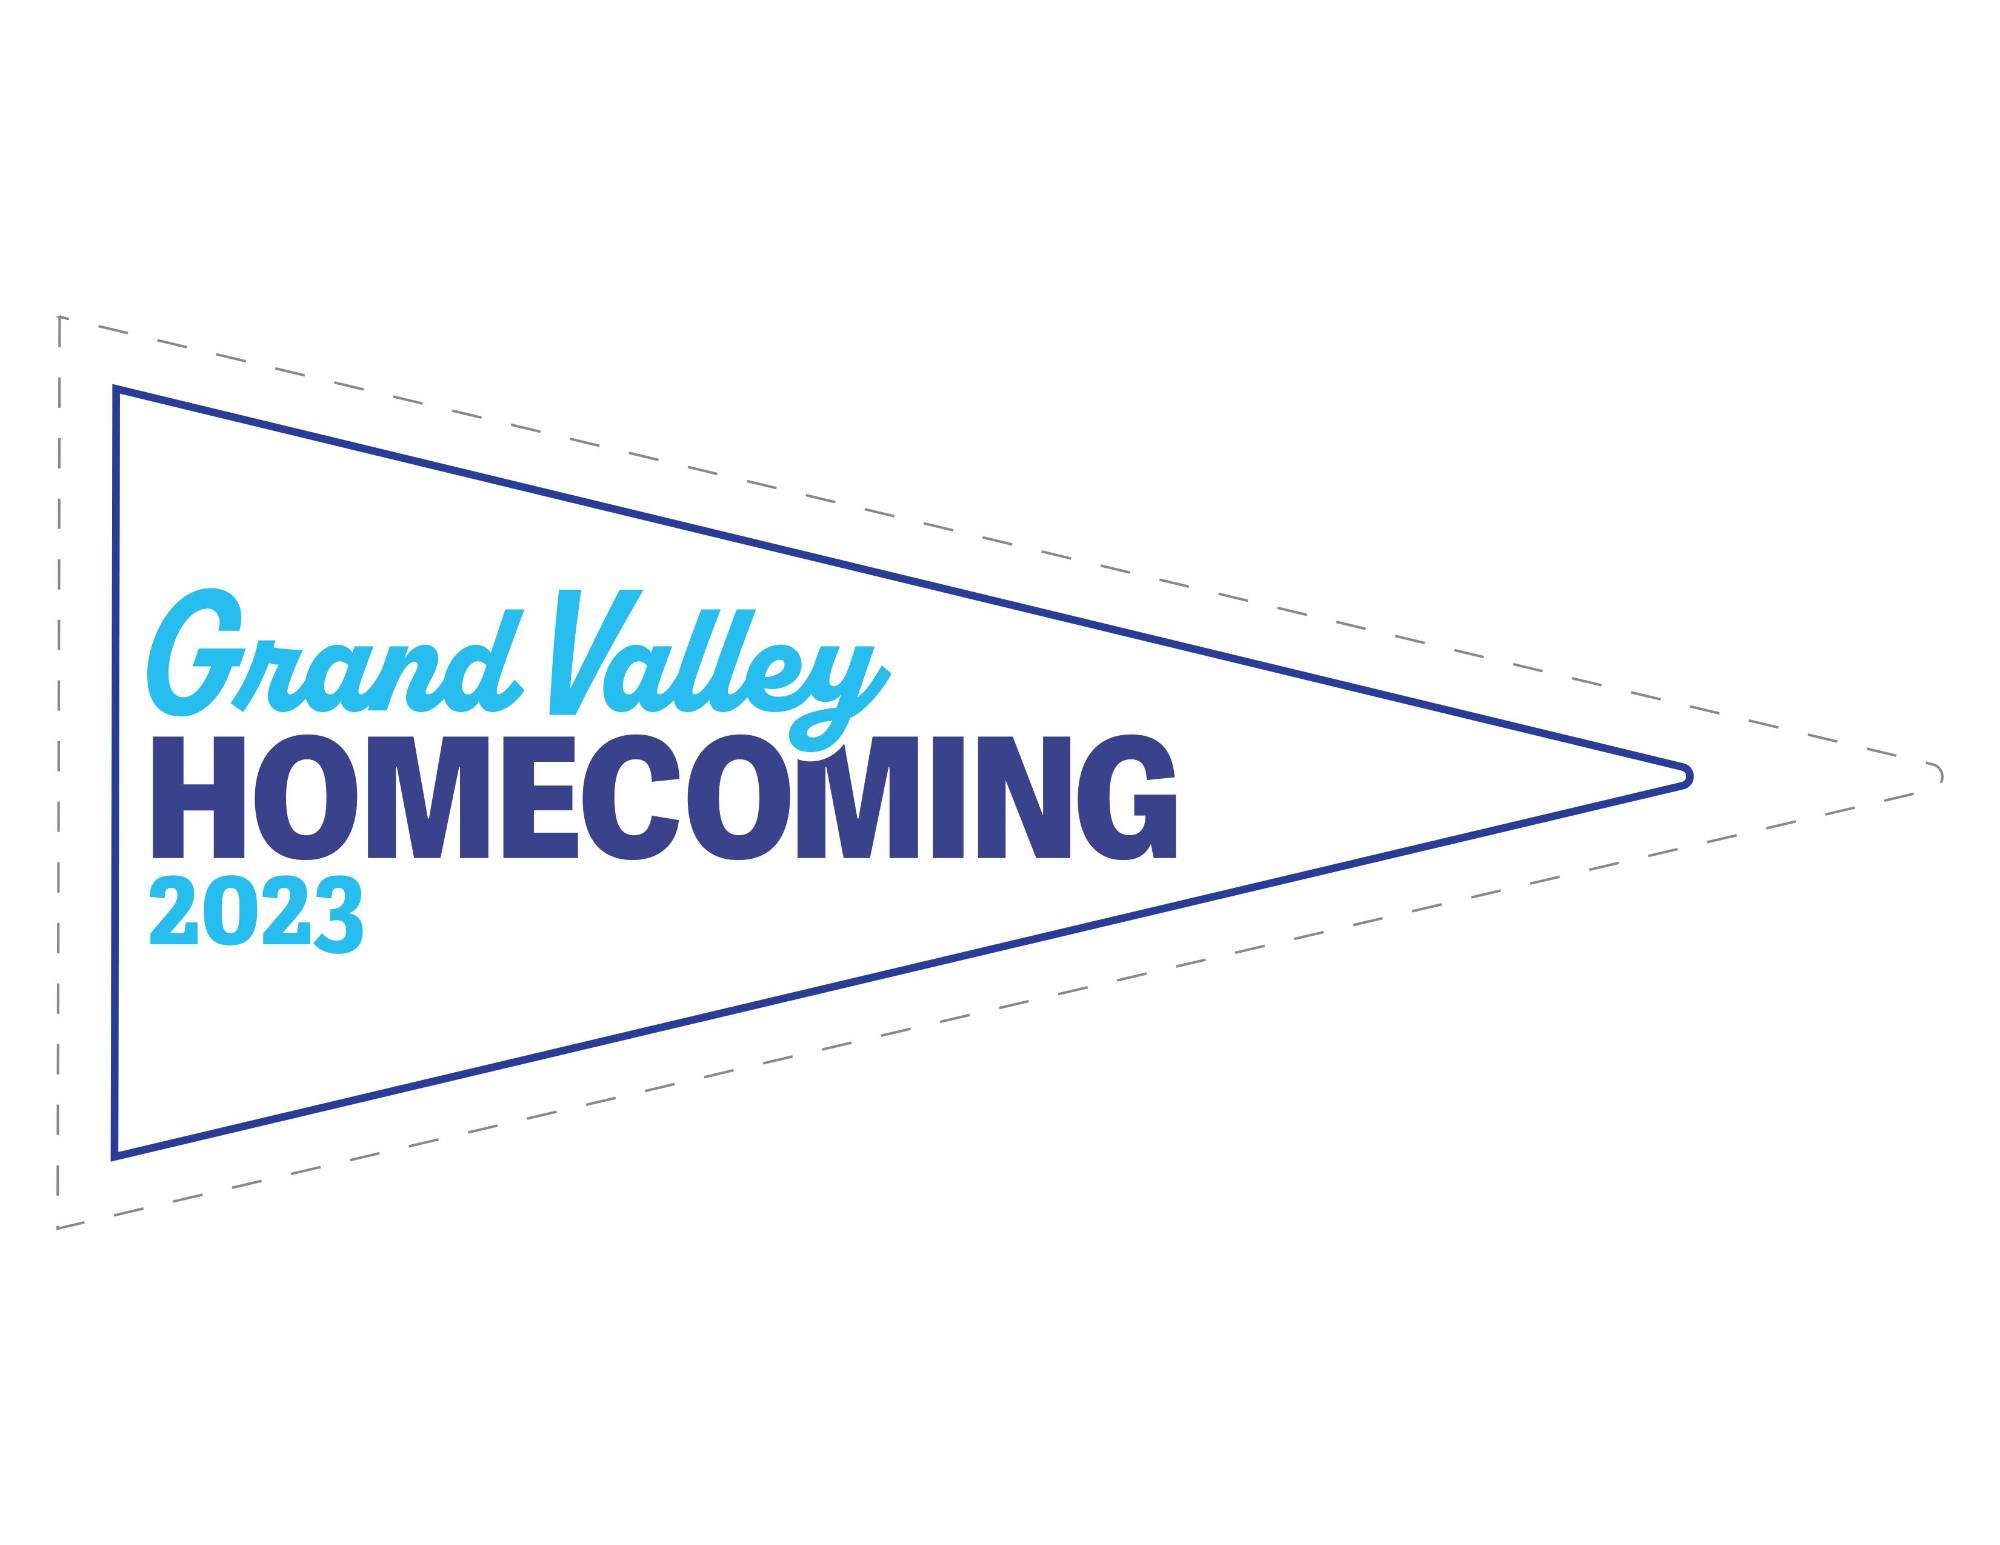 White Homecoming pennant